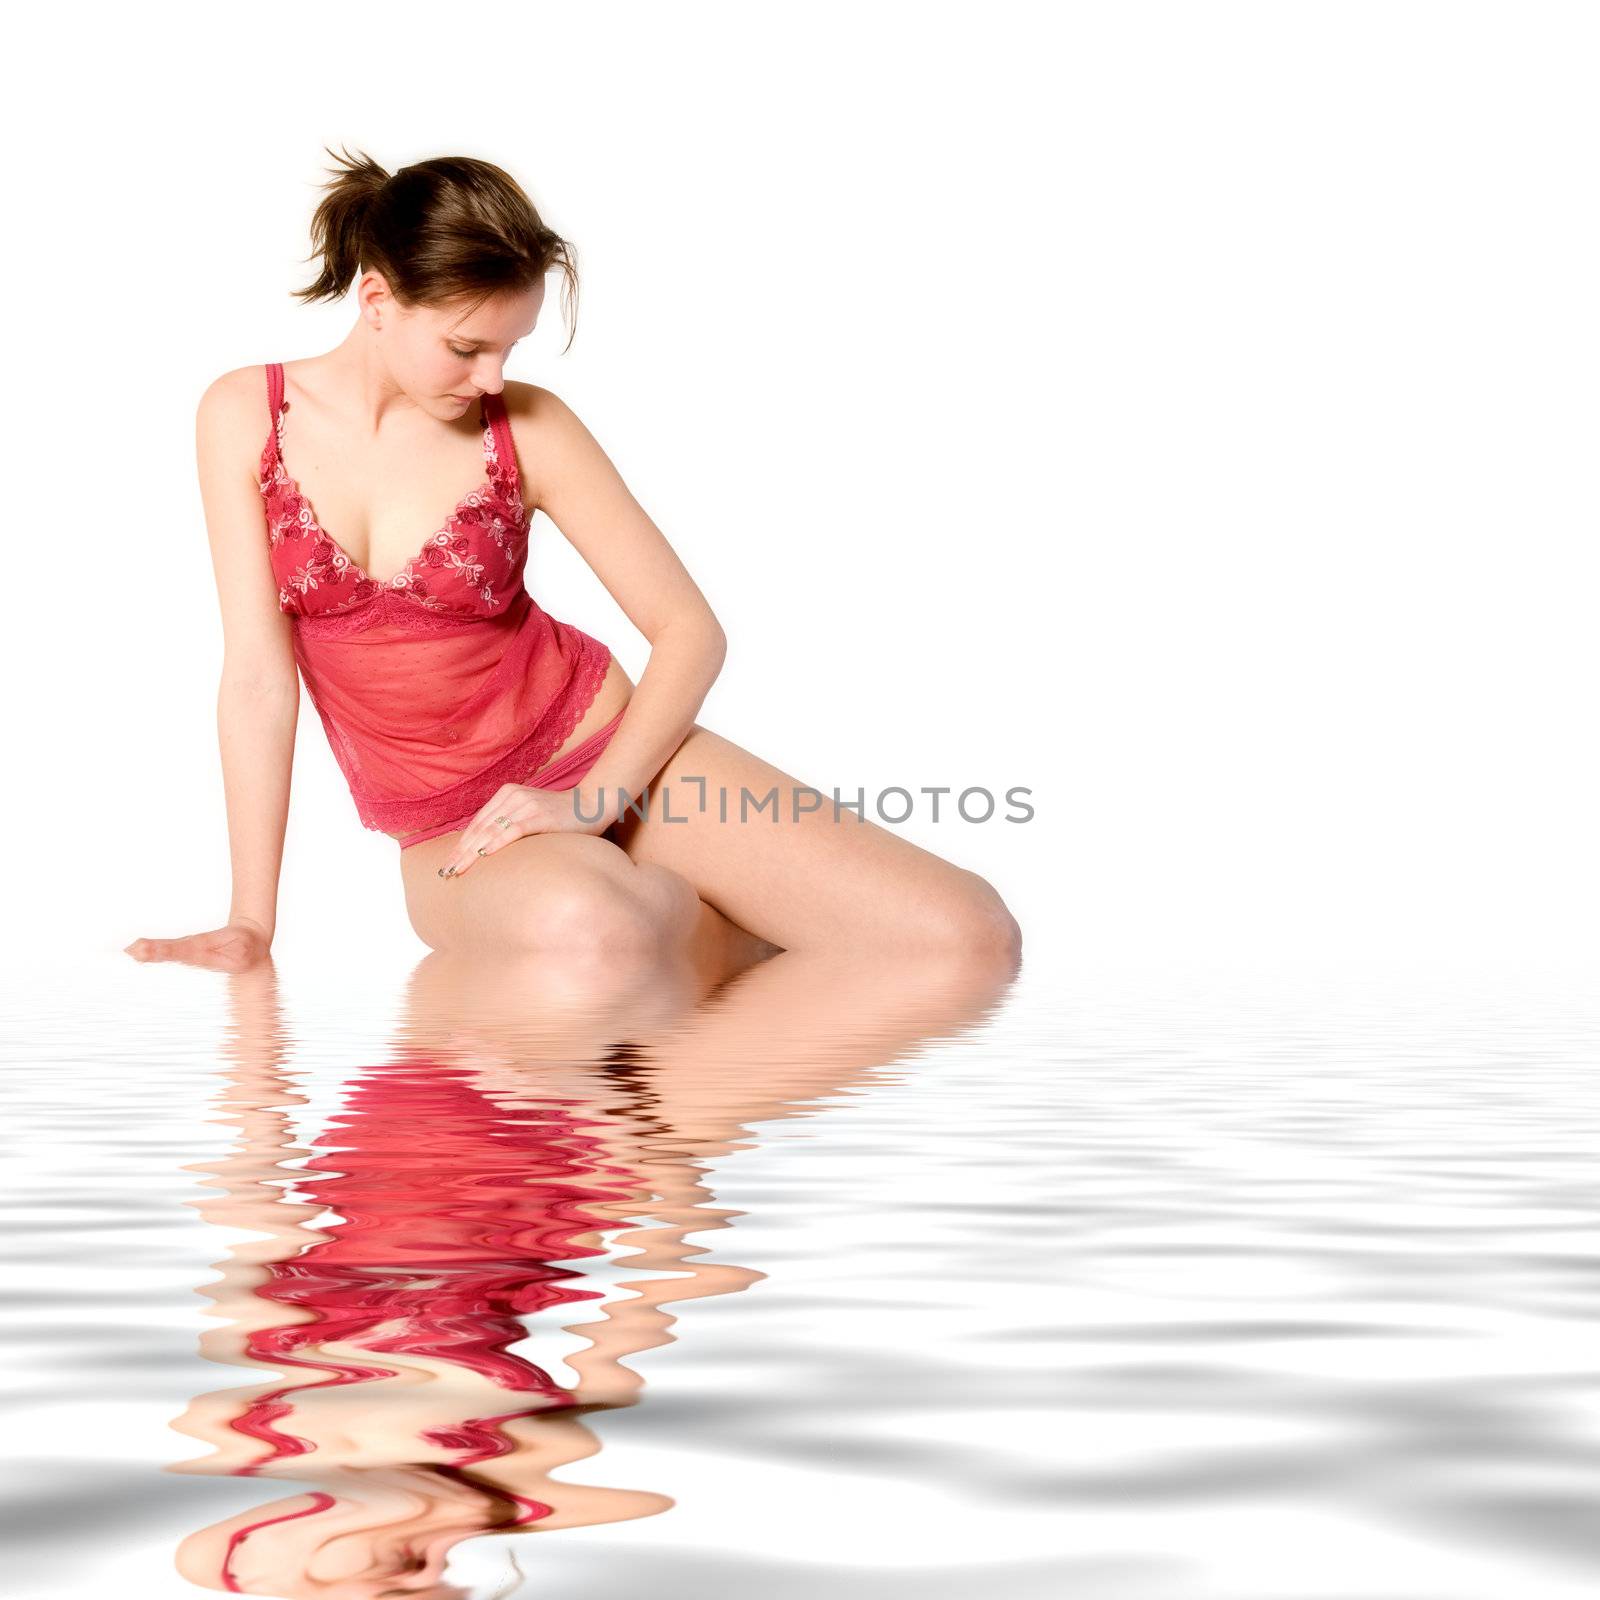 Studio portrait of a young woman in red lingerie near a pool